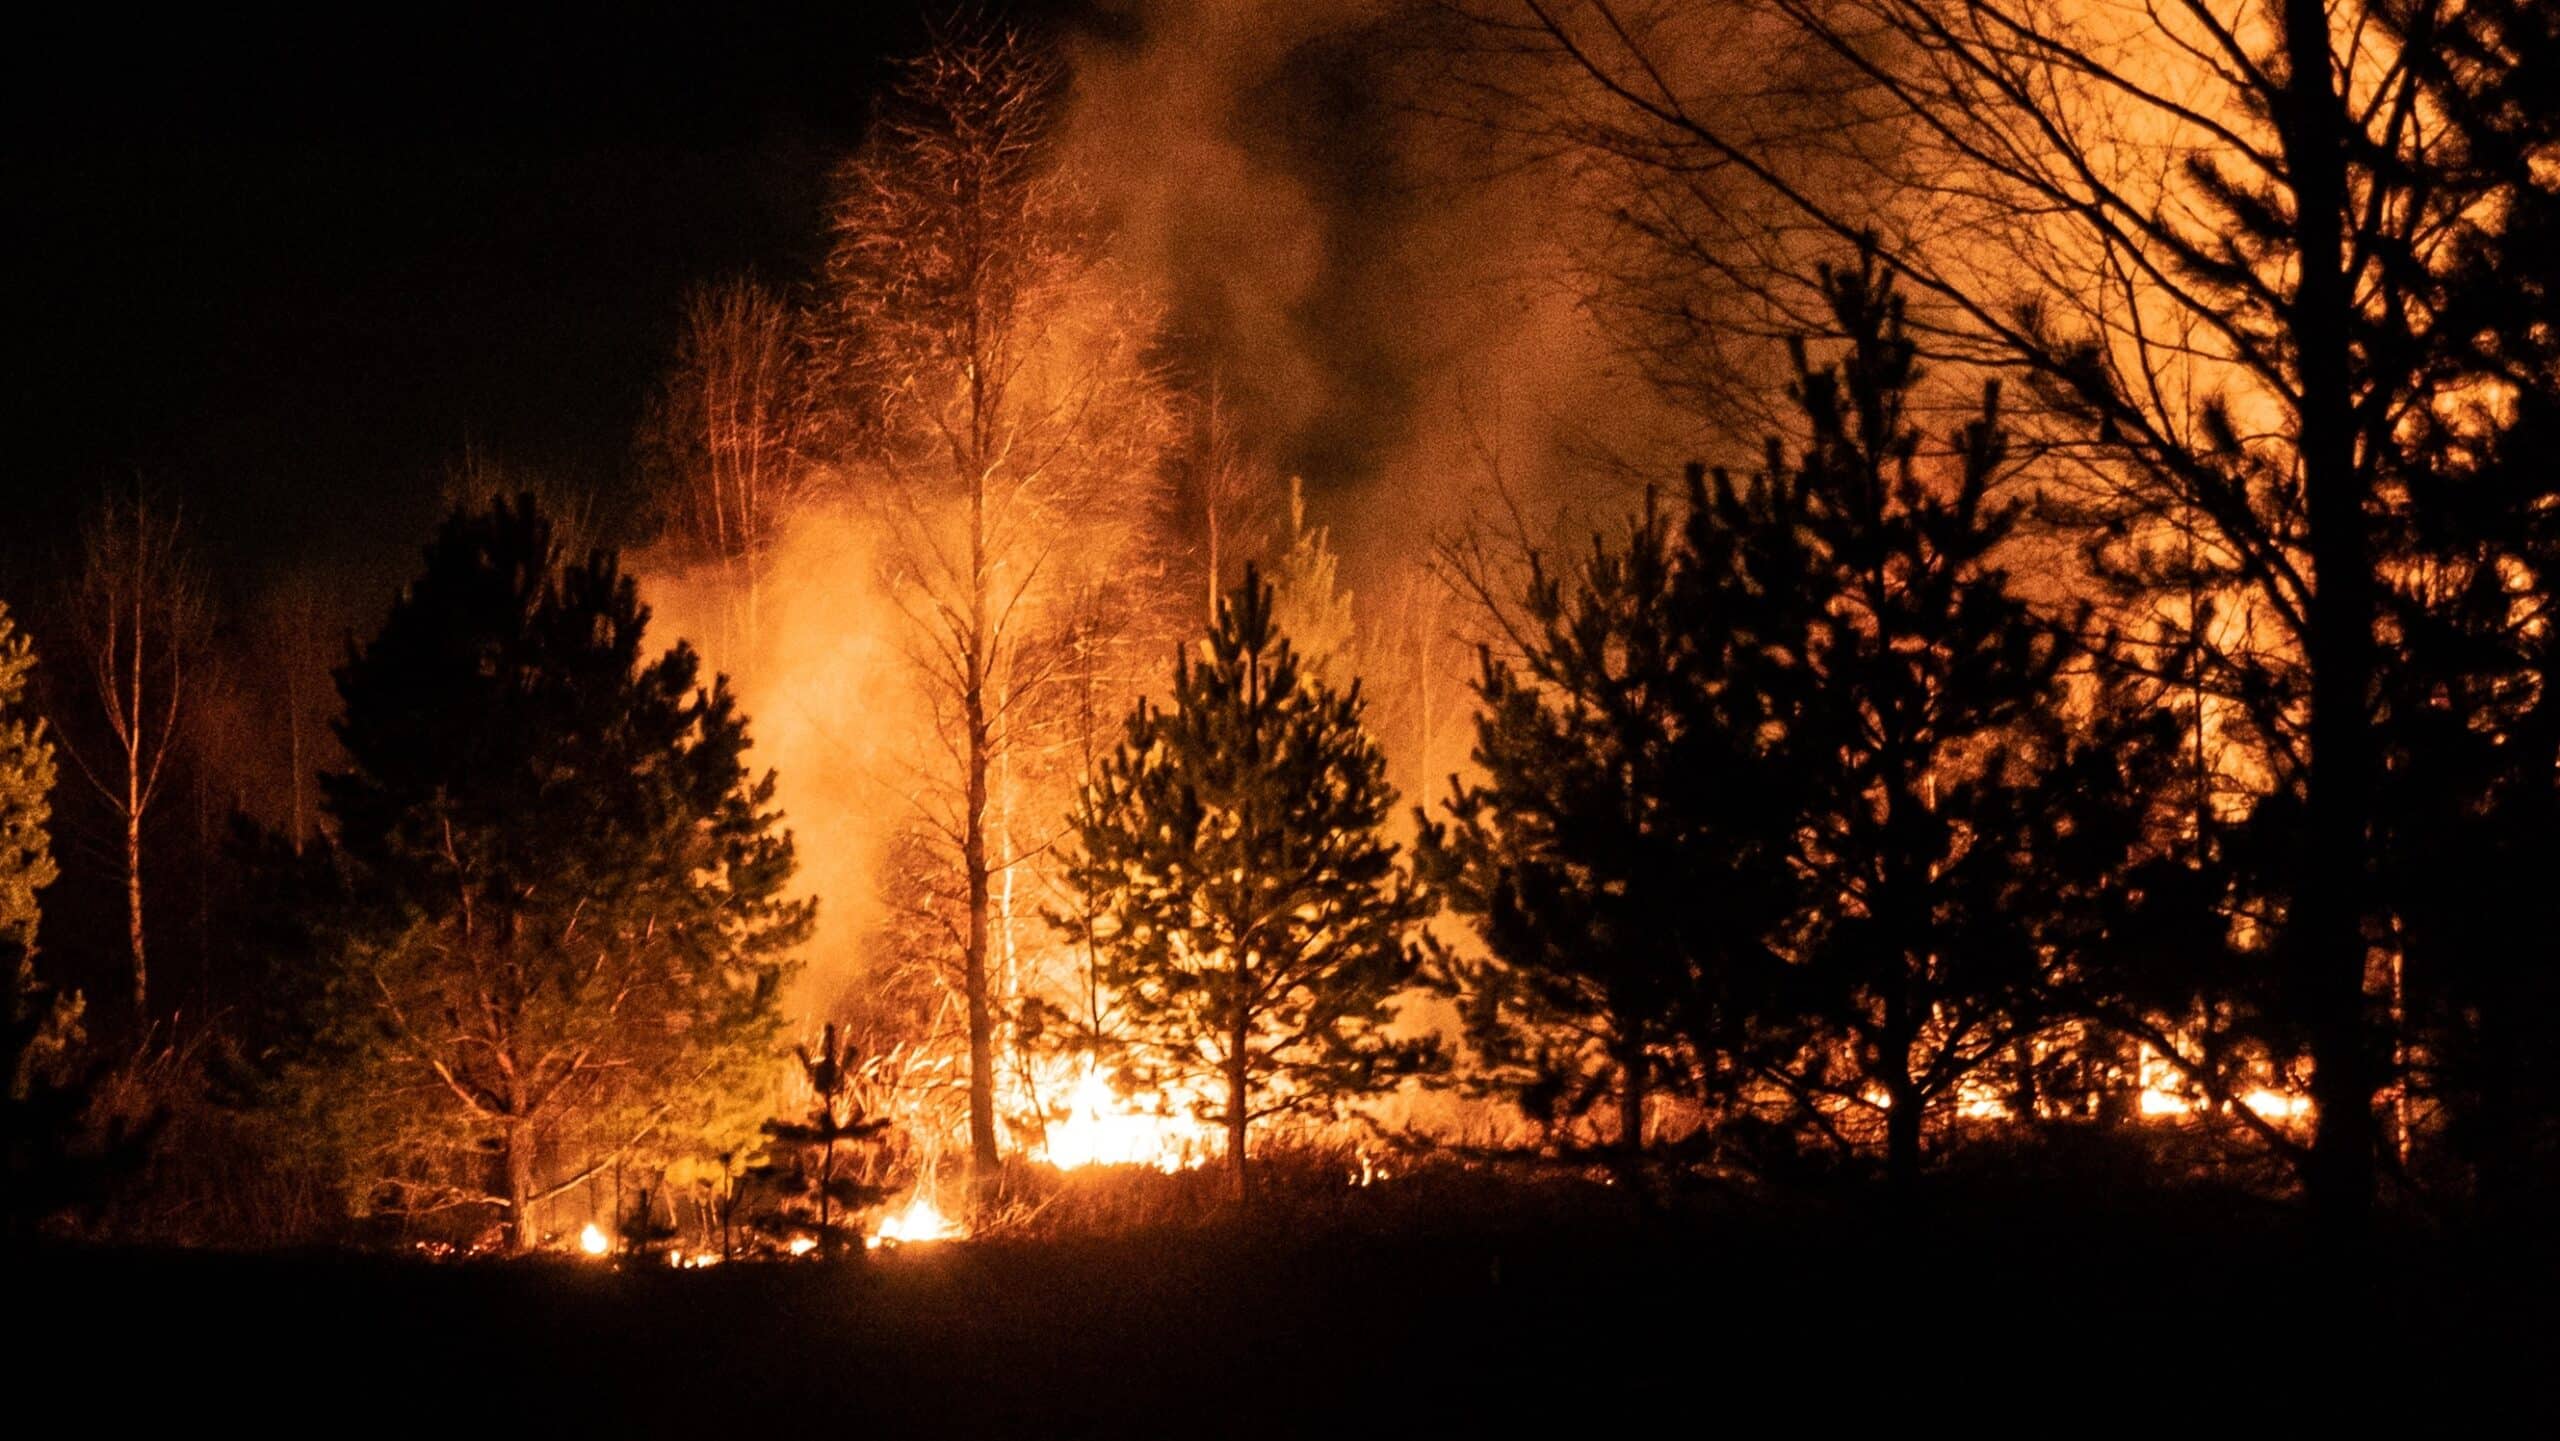 Forest fire - Climate Change Is Increasing Wildfire Risks for Forests. What Can We Do About It? - College of Natural Resources at NC State University